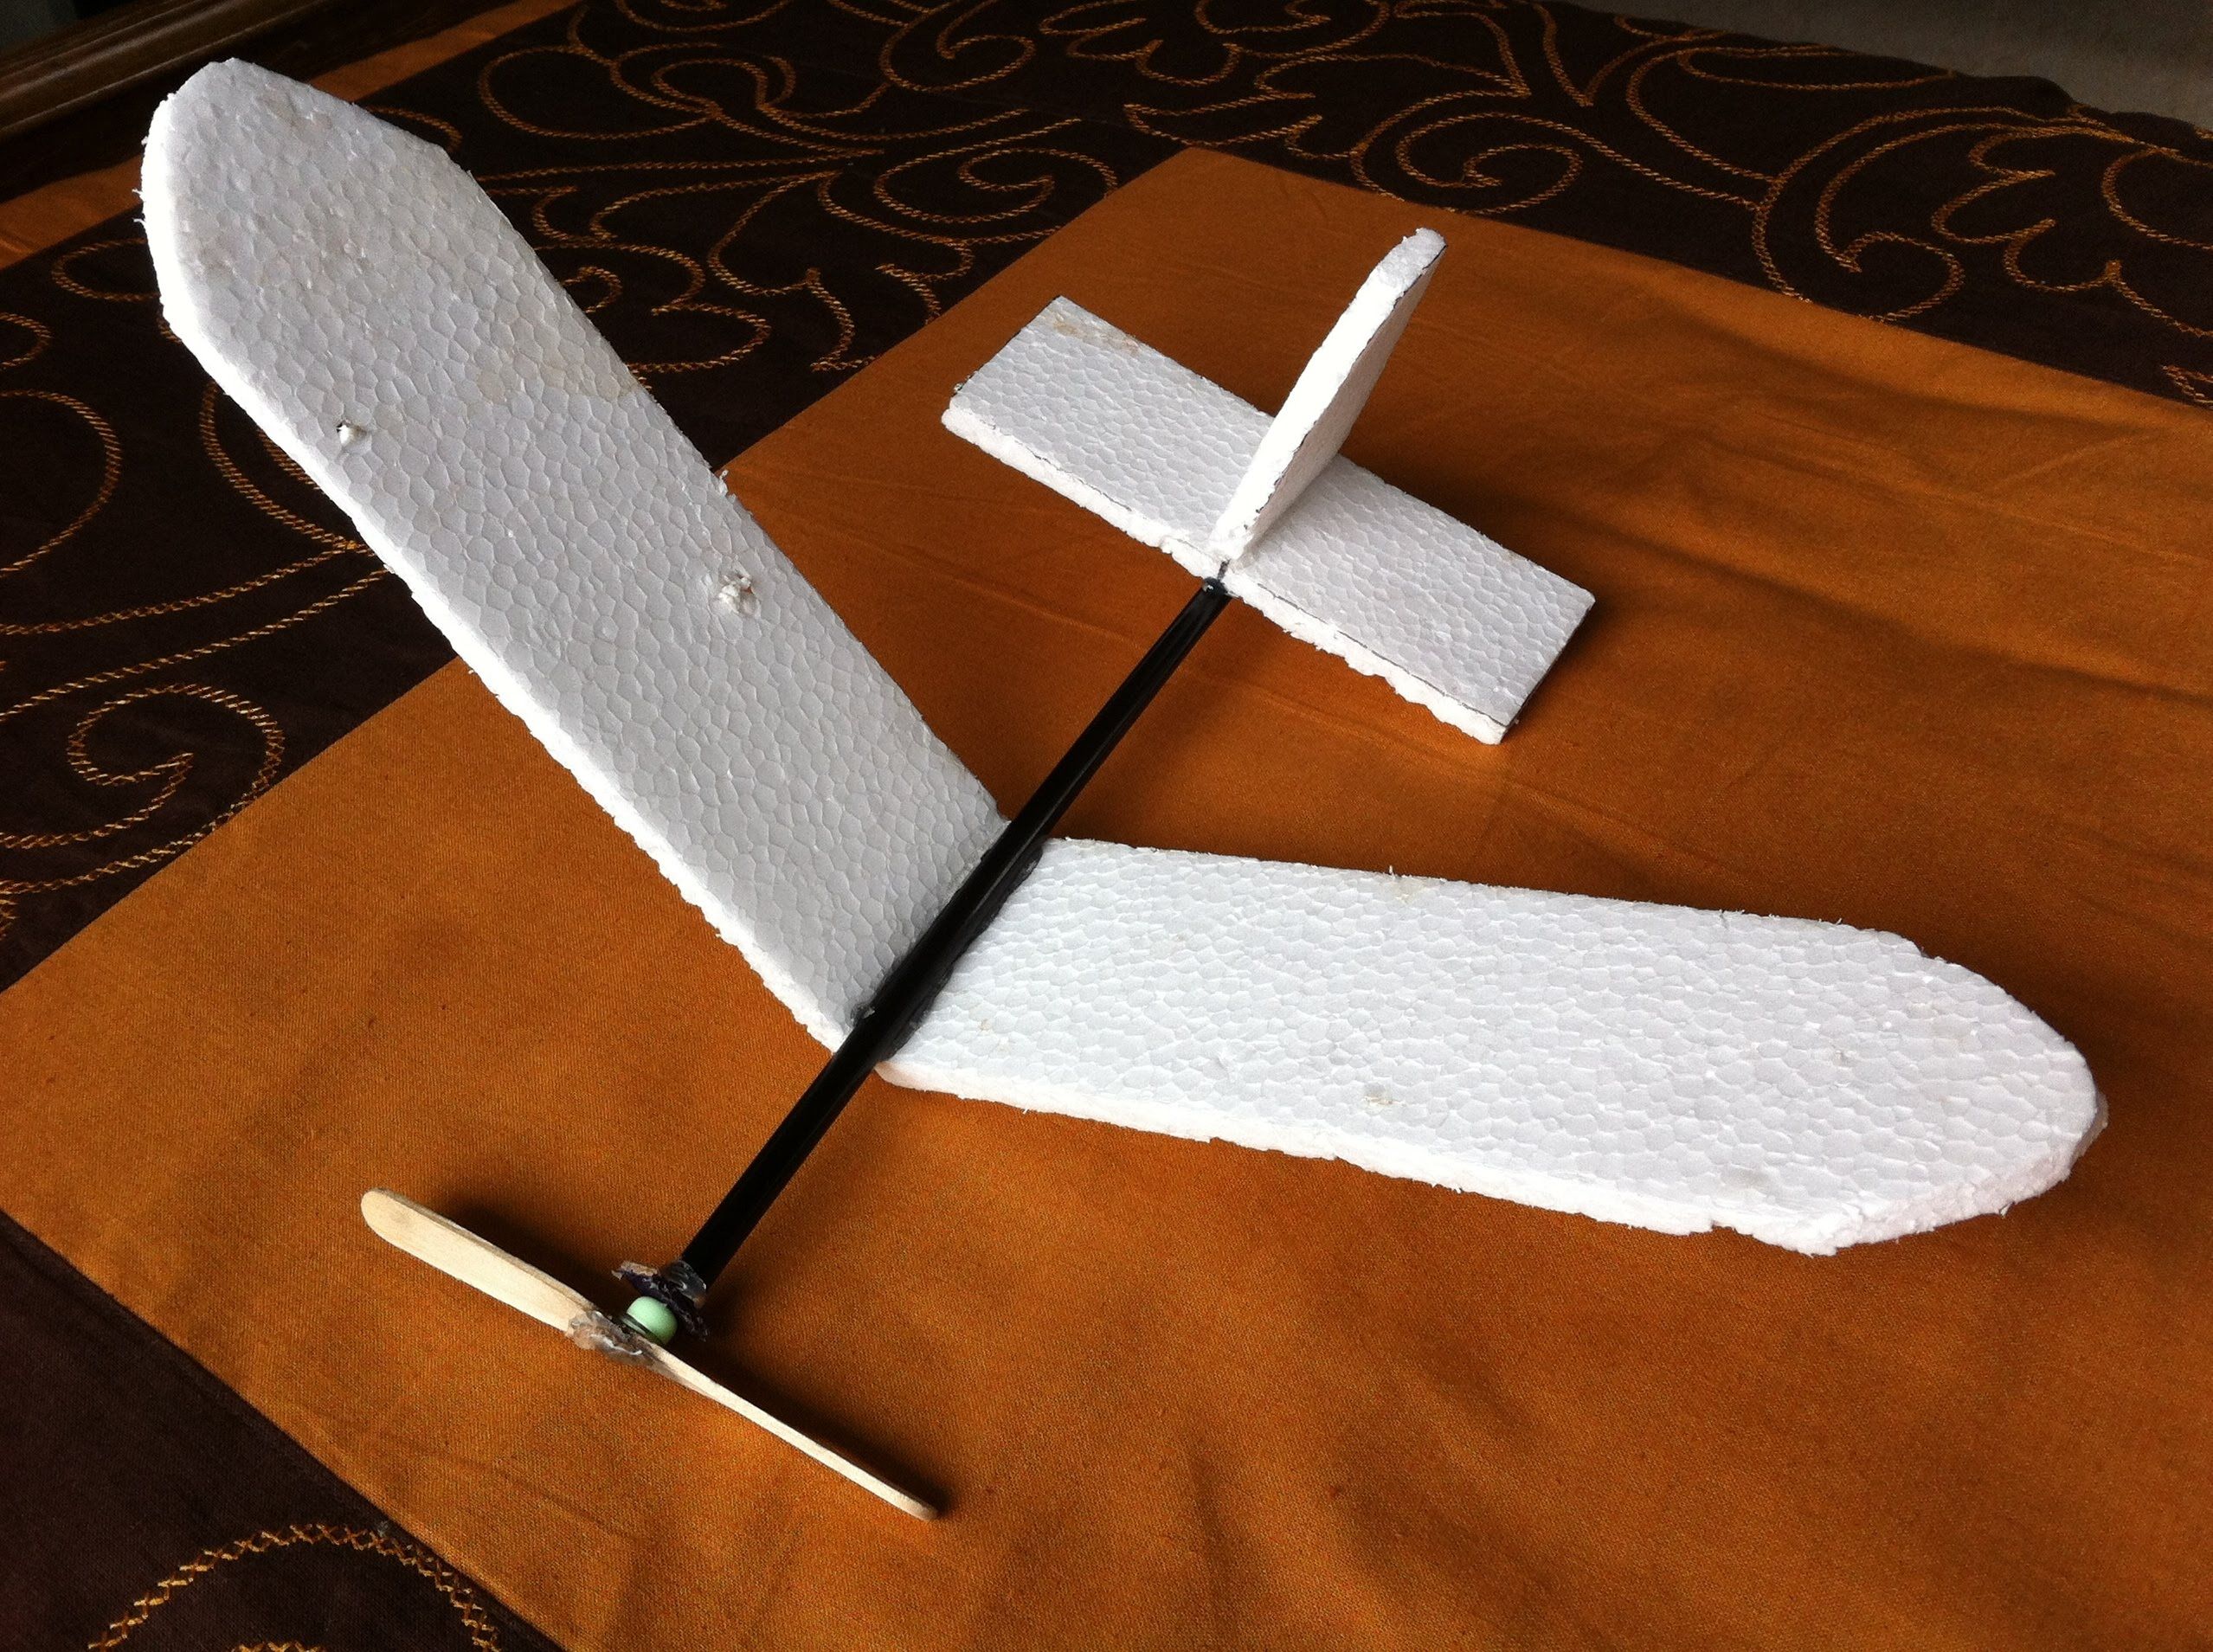 Build a Giant Styrofoam Plane For Fun: How to Make a Large Foam Glider at Home